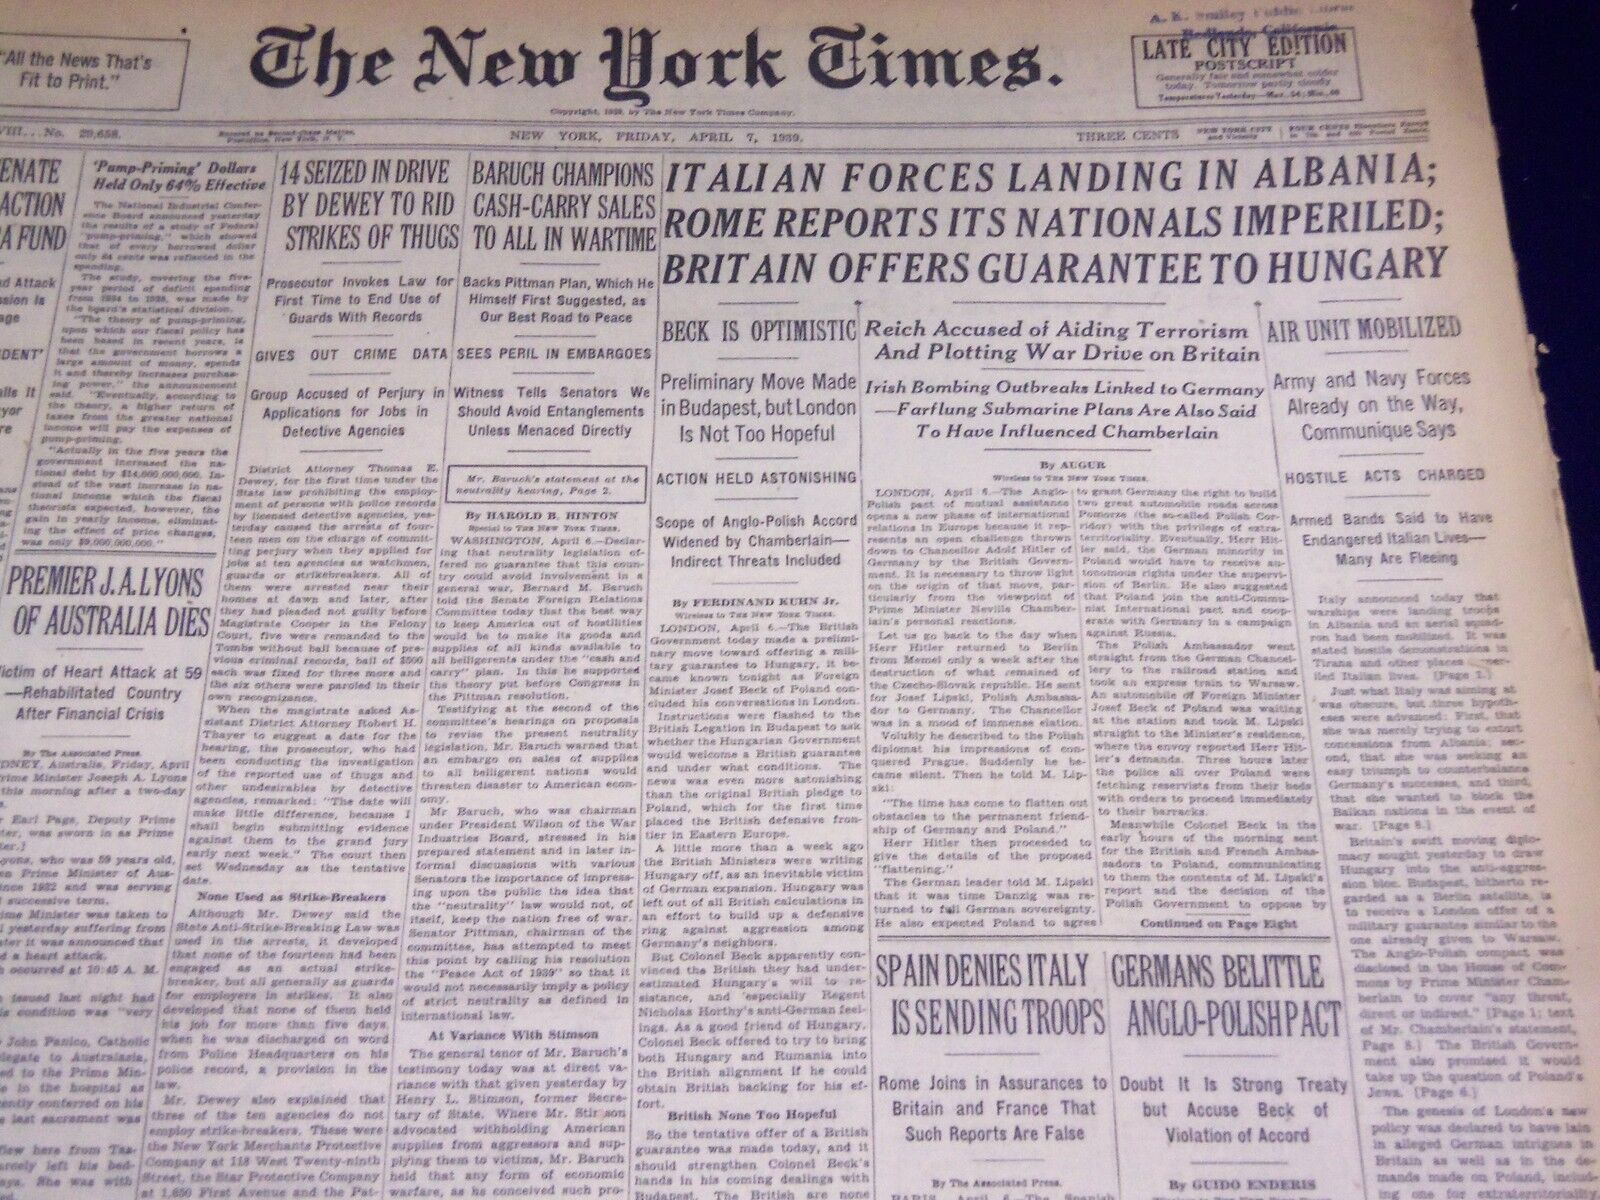 1939 APRIL 7 NEW YORK TIMES - ITALIAN FORCES IN ALBANIA - NT 3075